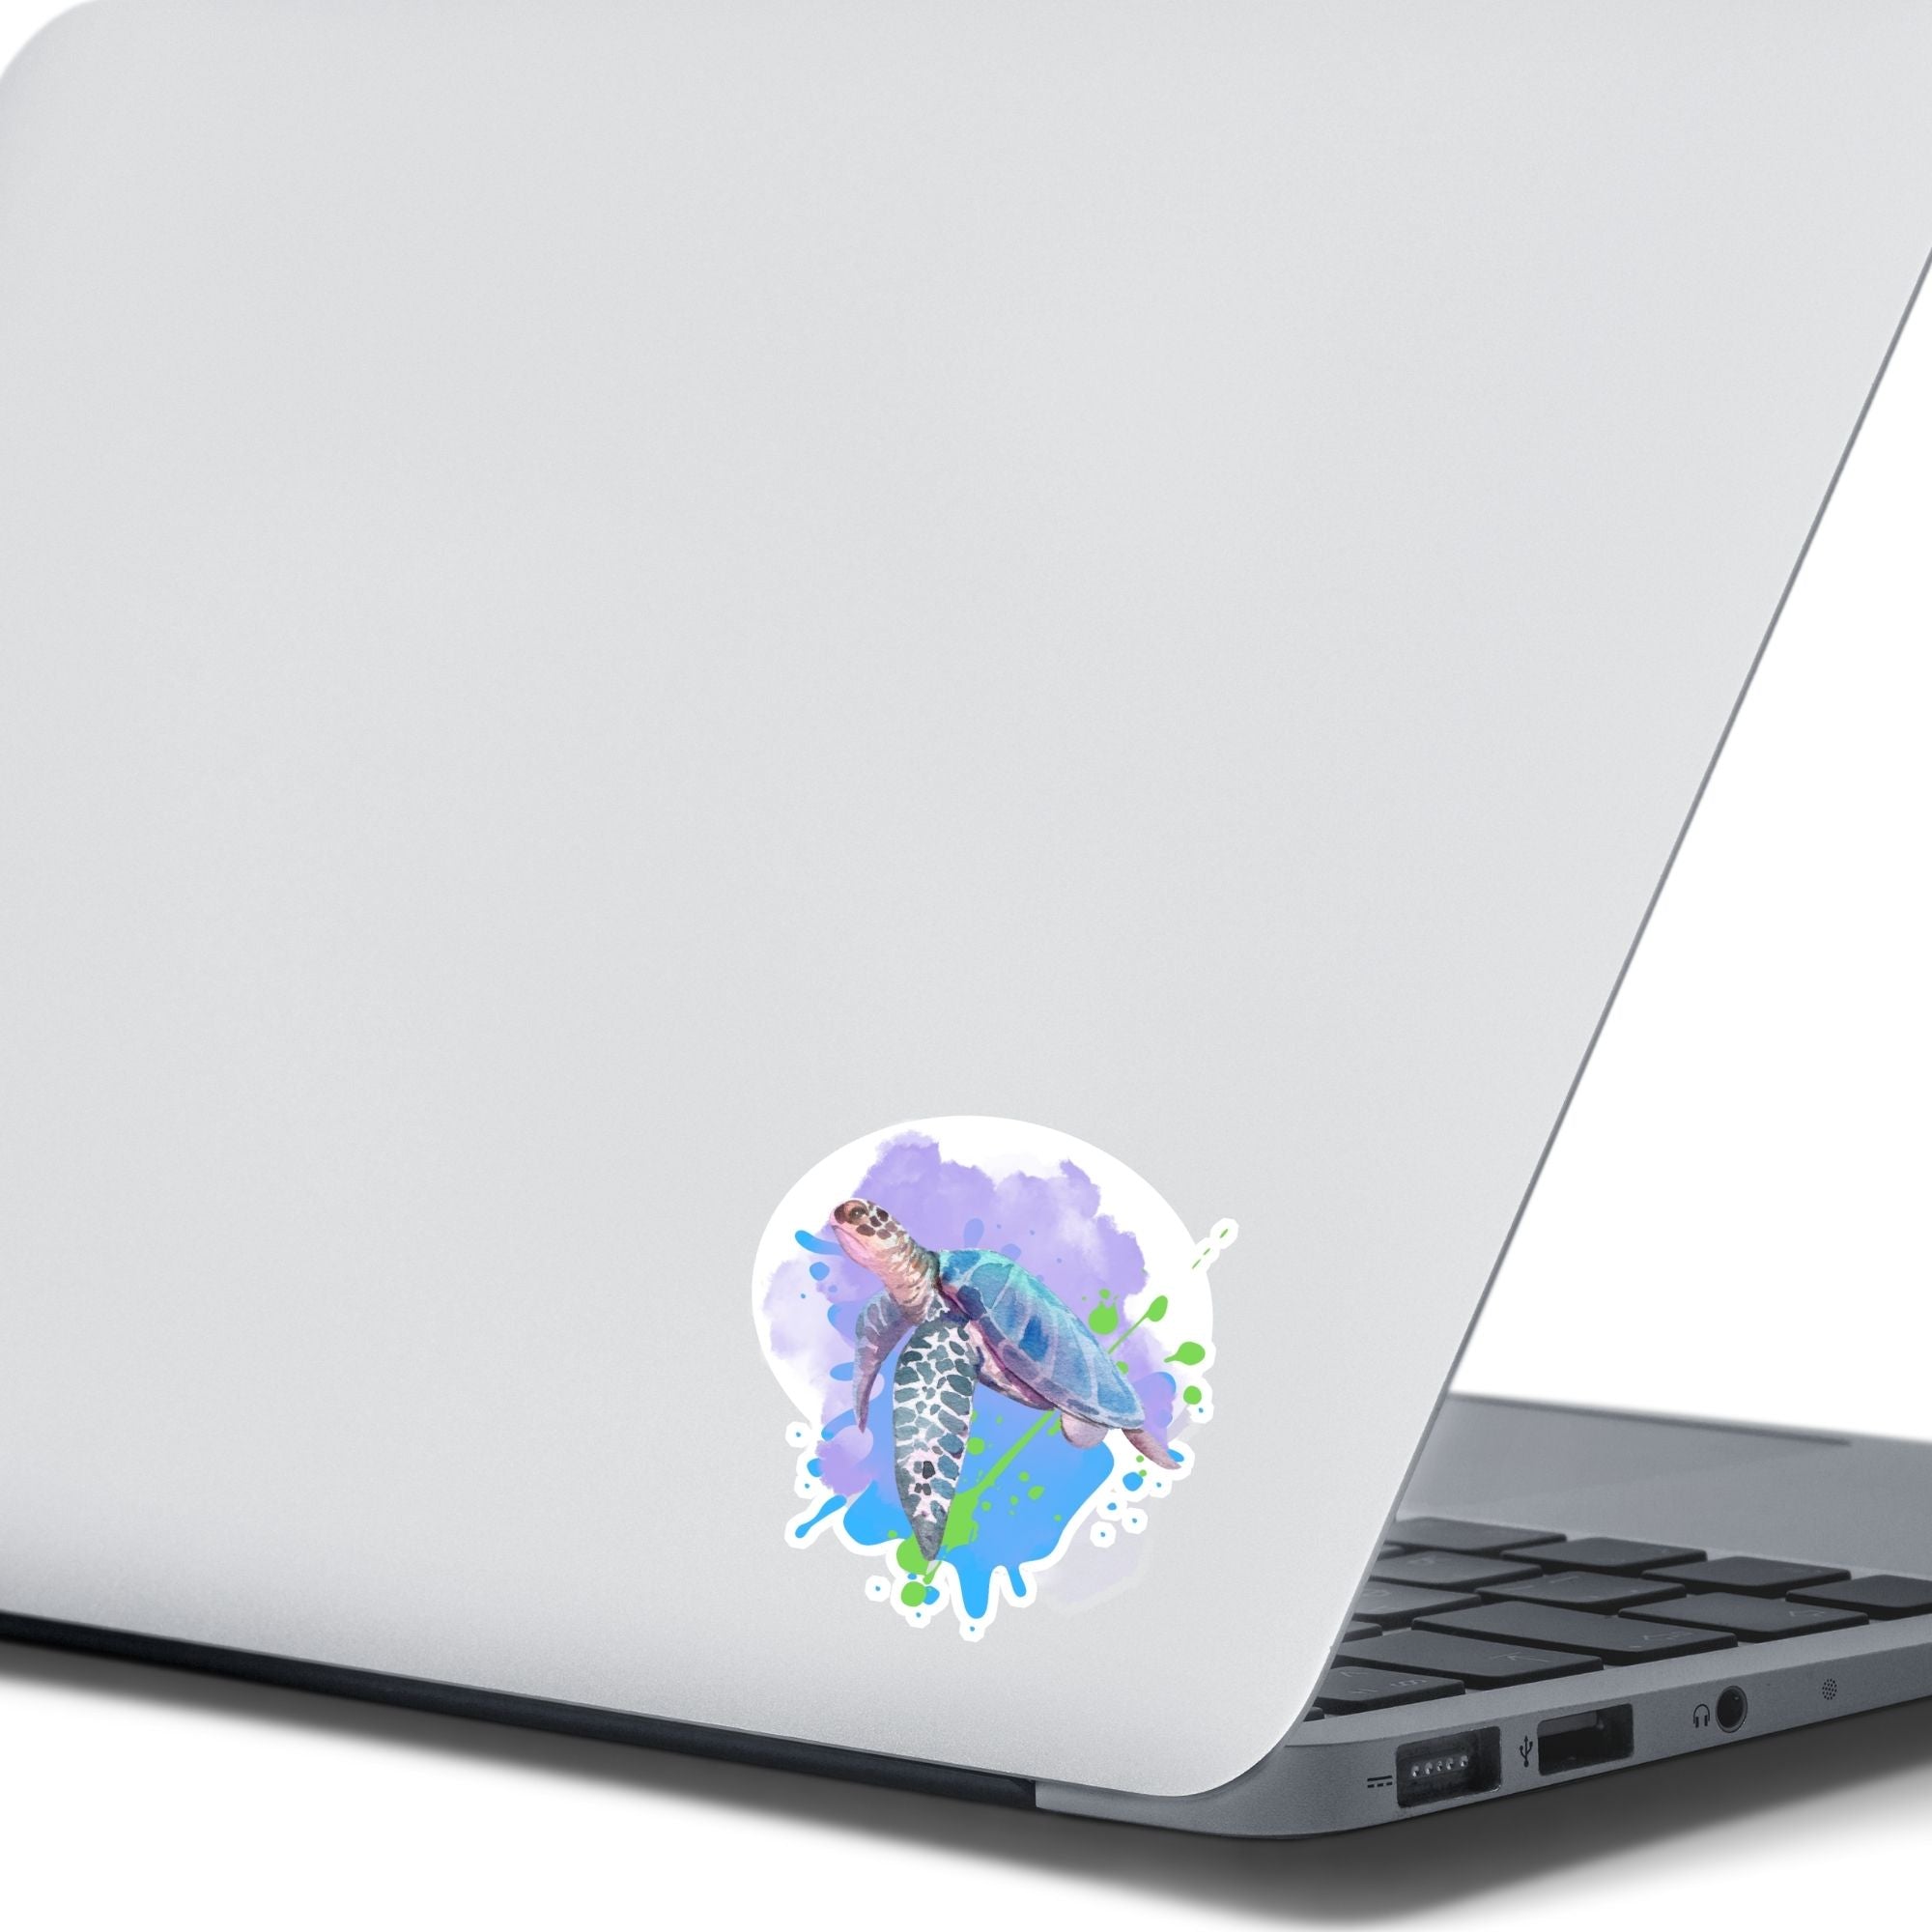 This individual die-cut sticker has a serene looking green sea turtle on a blue and purple background with splash of green. Just looking at this image is relaxing! This image shows the Watercolor Sea Turtle die-cut sticker on the back of an open laptop.